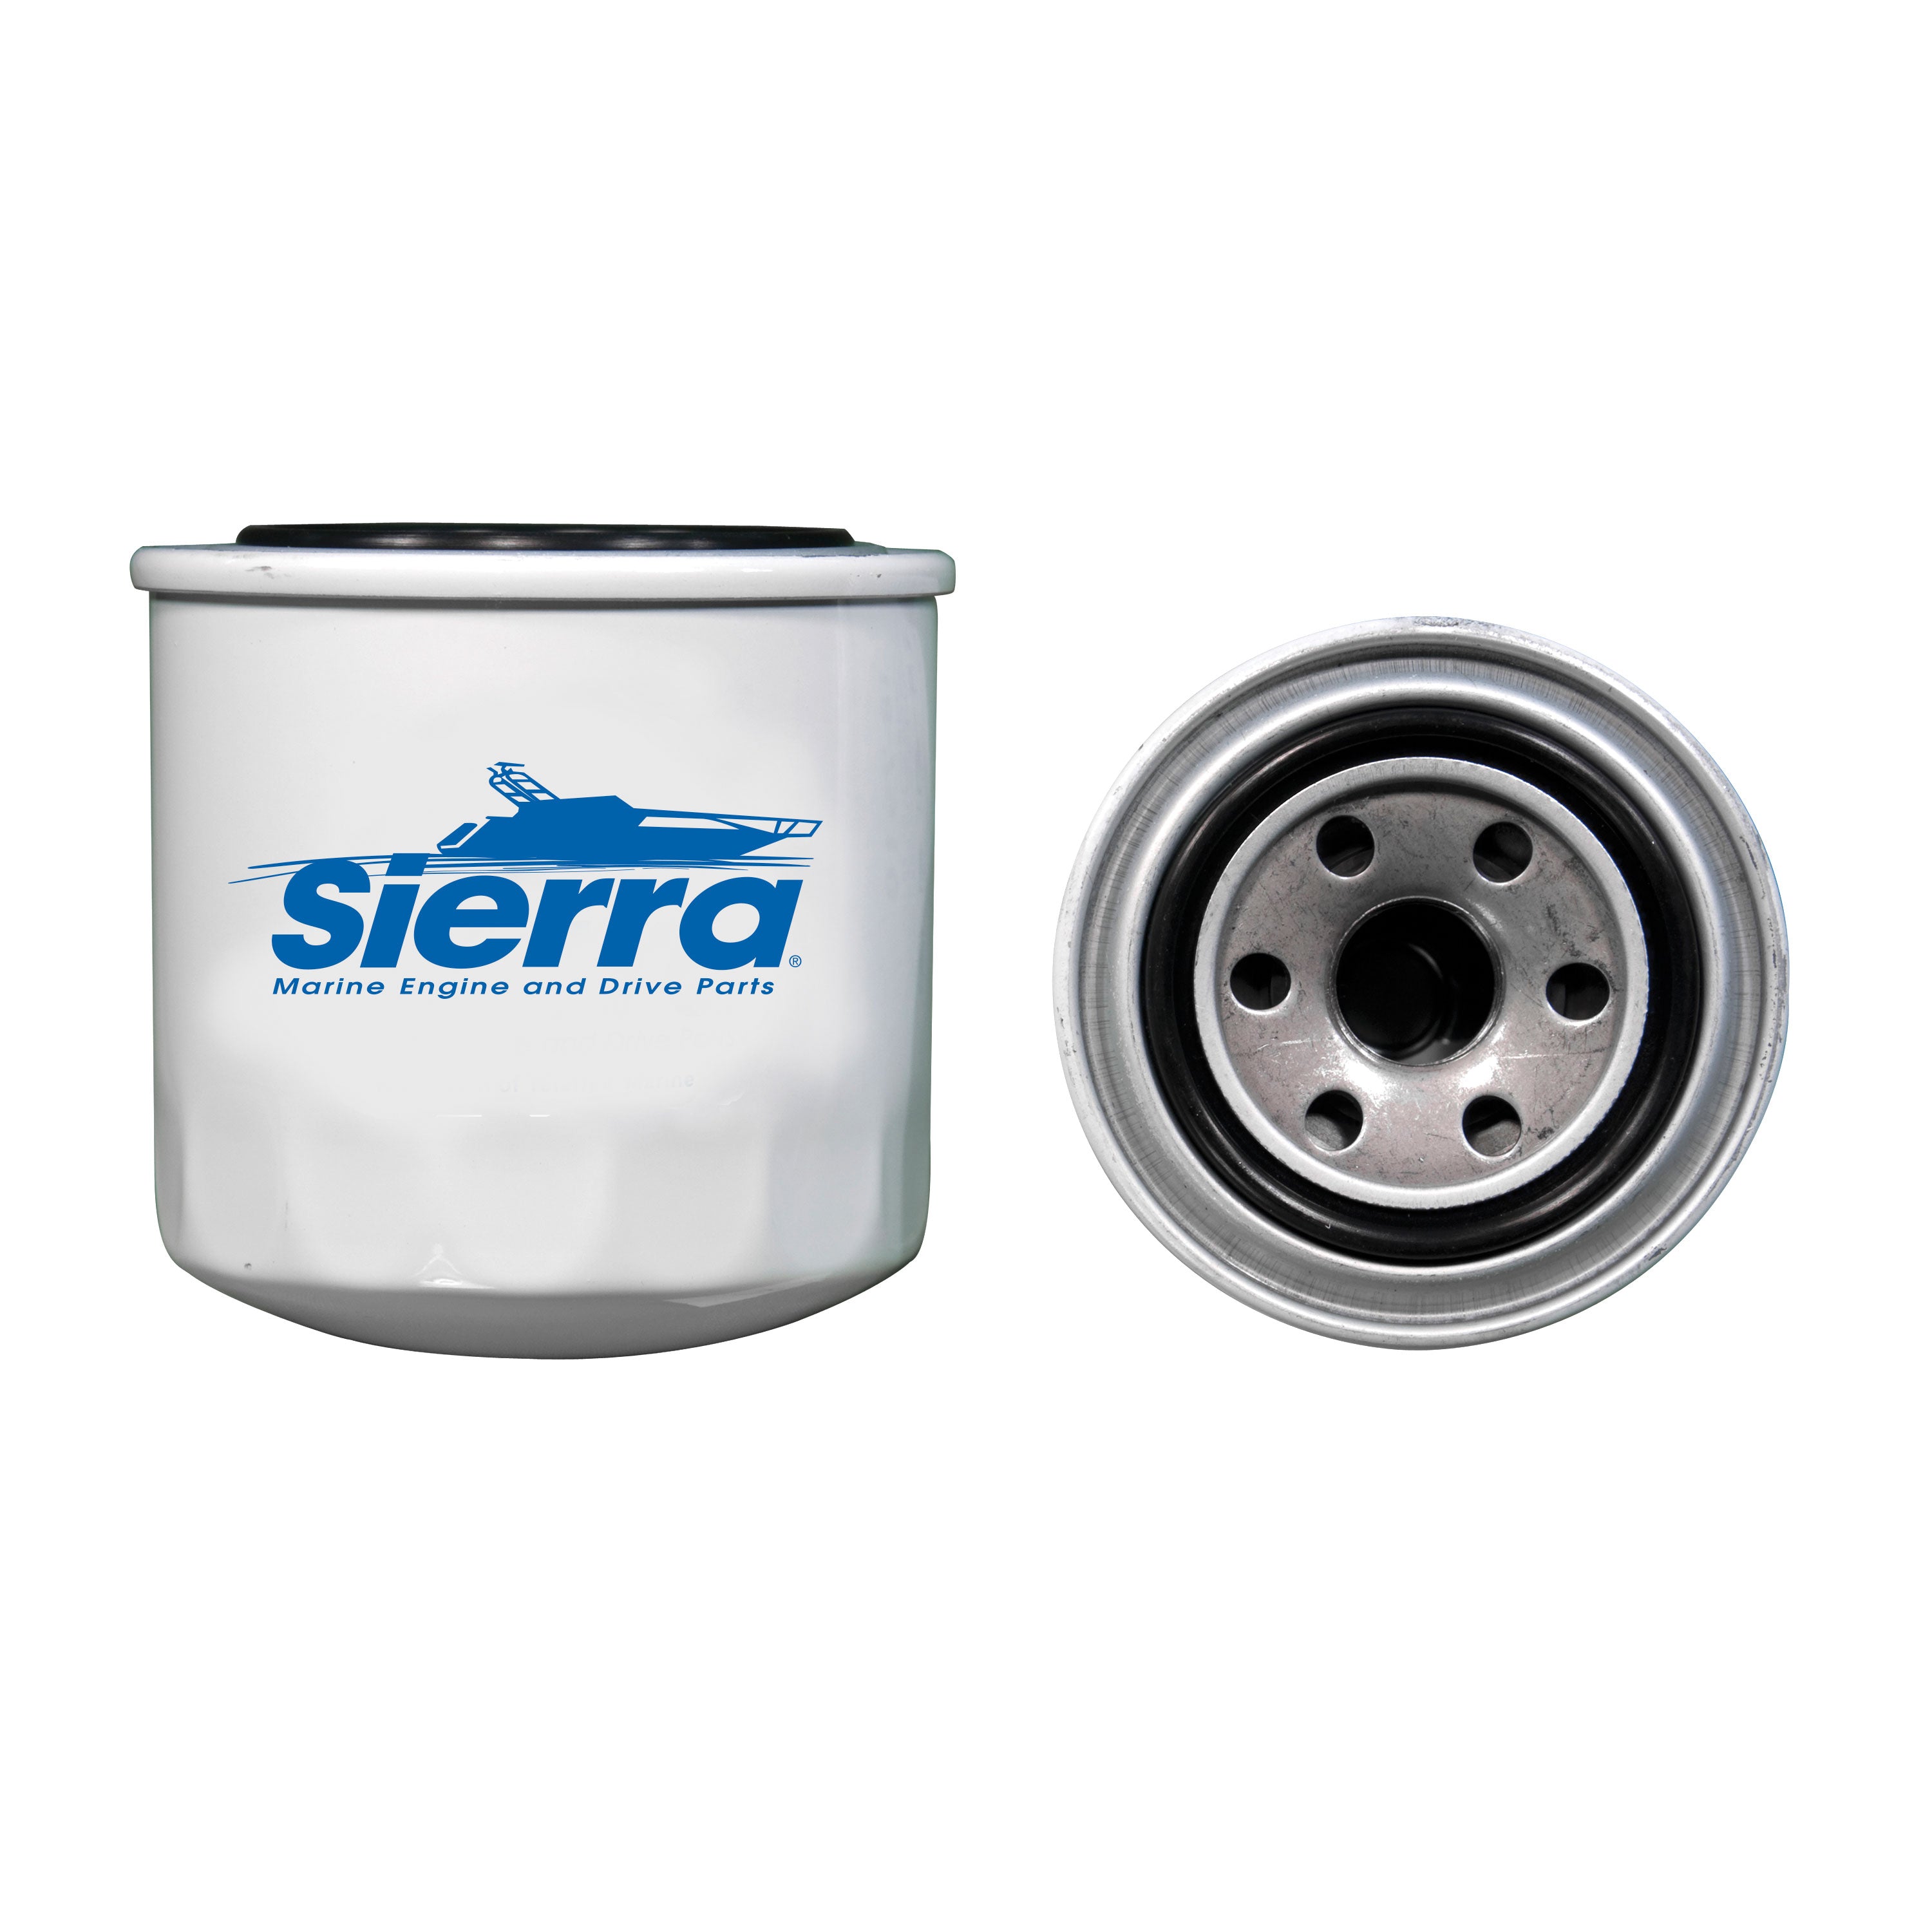 Sierra 18-7909 Replacement for Select Honda Oil Filters